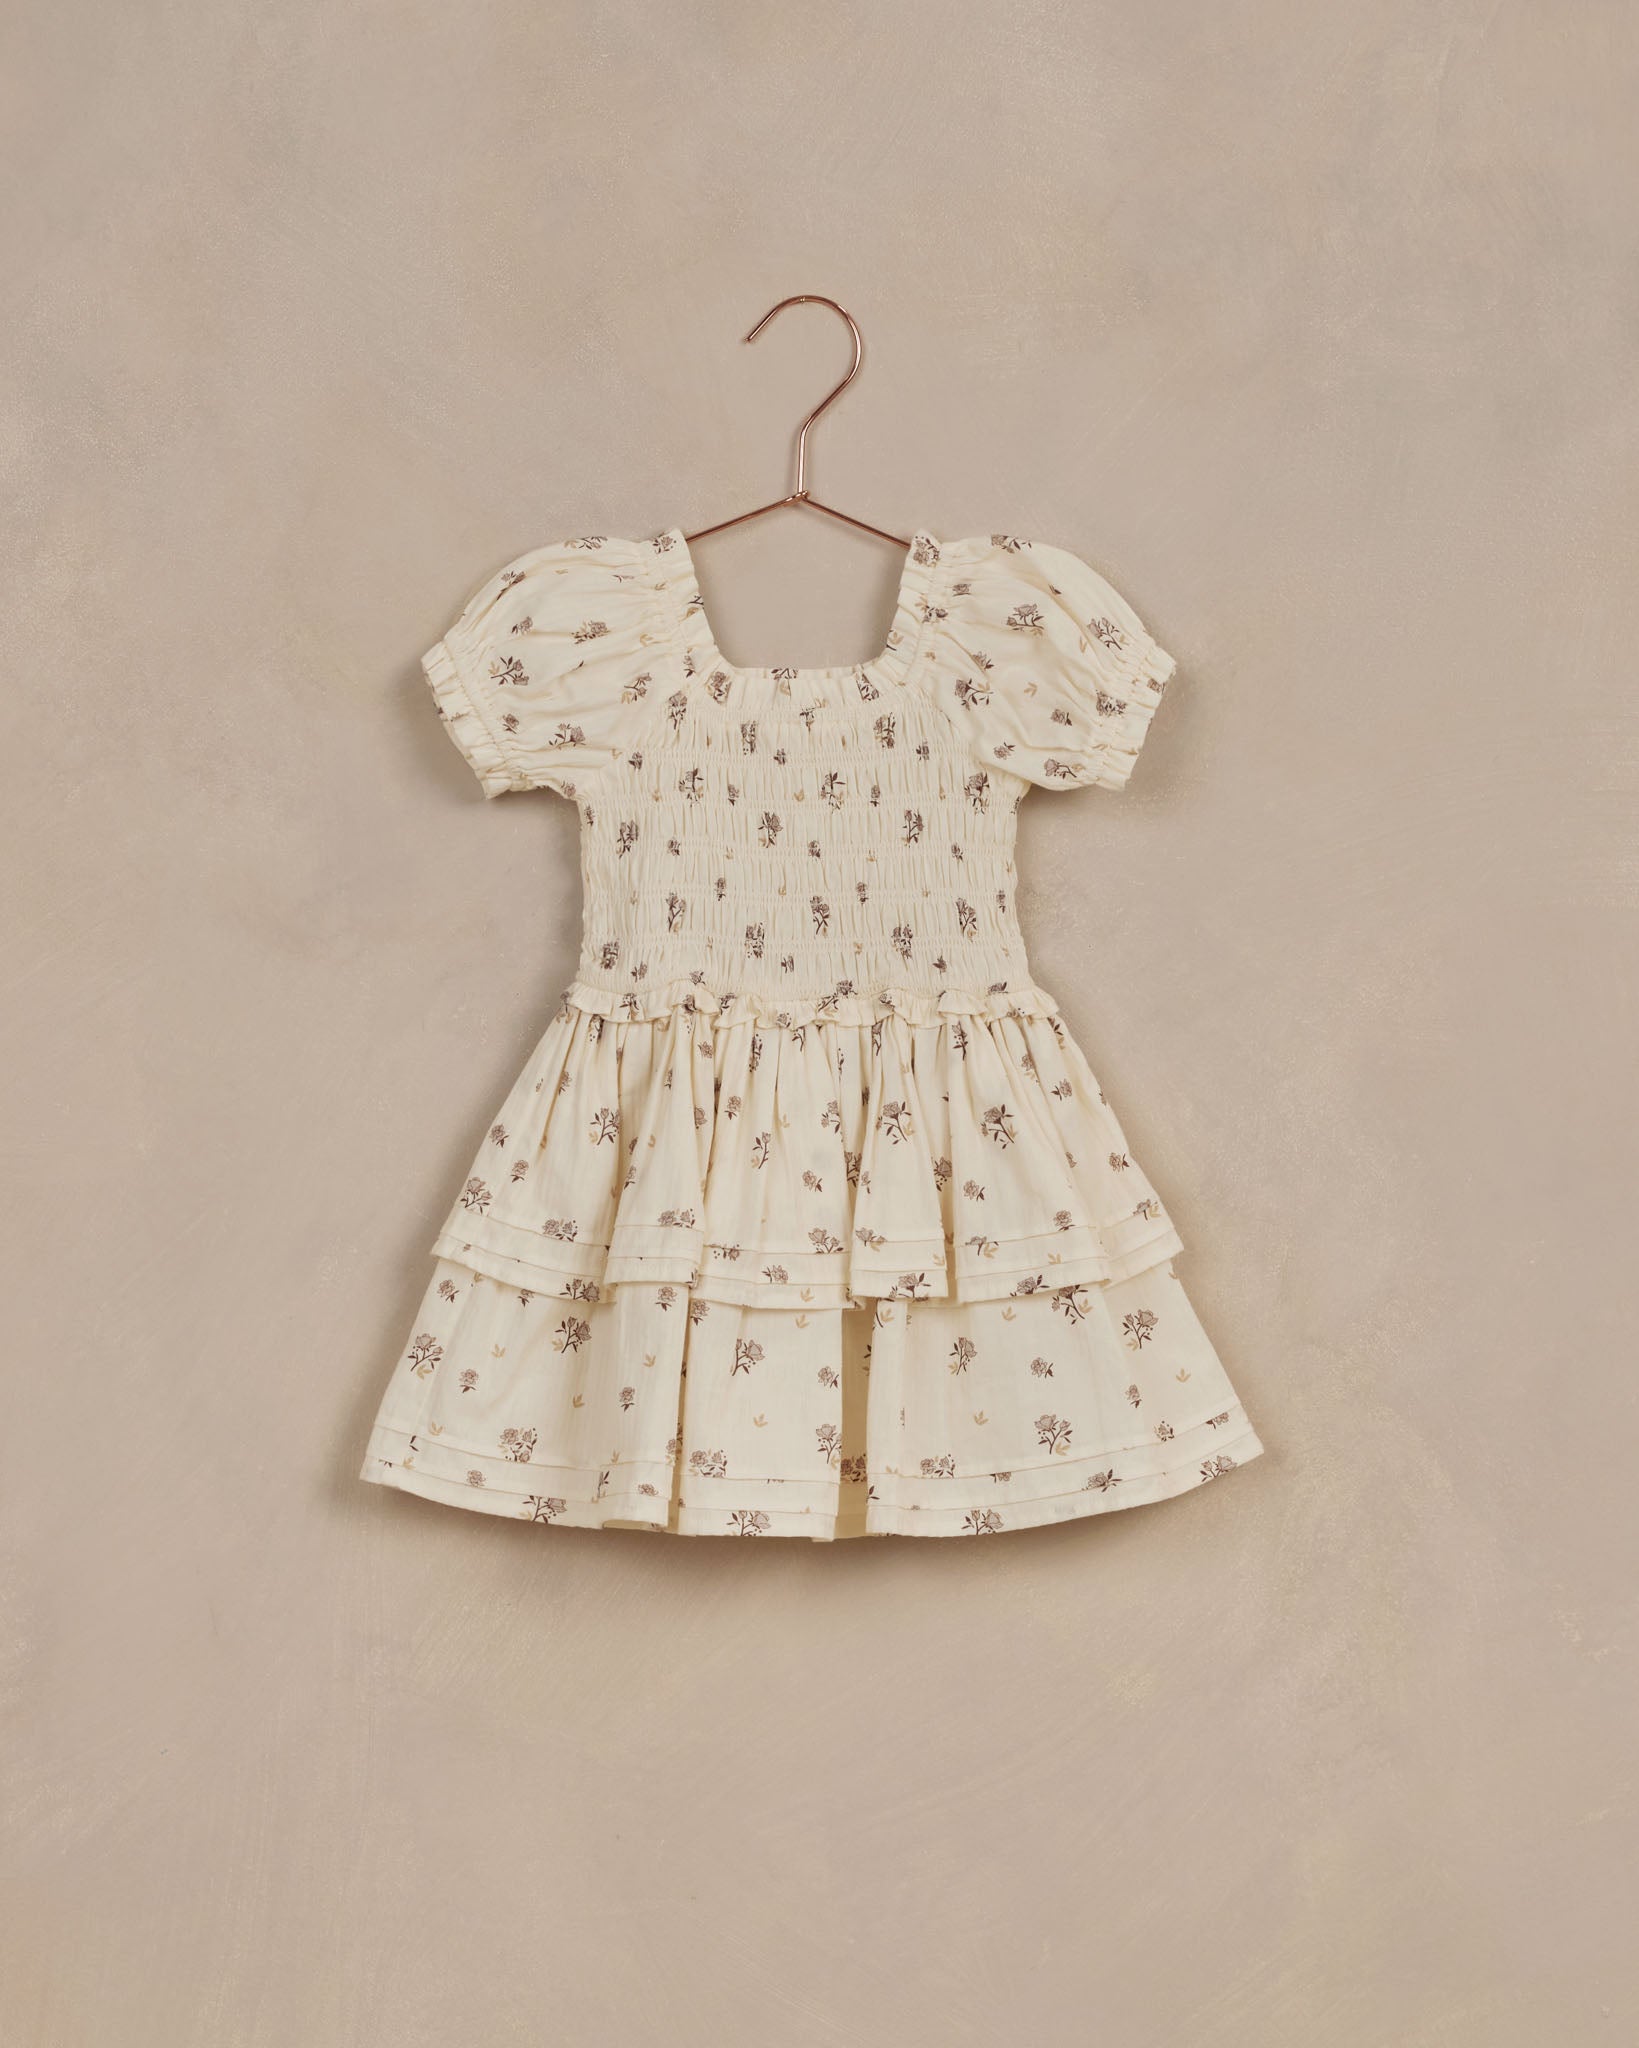 Cosette Dress || Rose Ditsy - Rylee + Cru | Kids Clothes | Trendy Baby Clothes | Modern Infant Outfits |